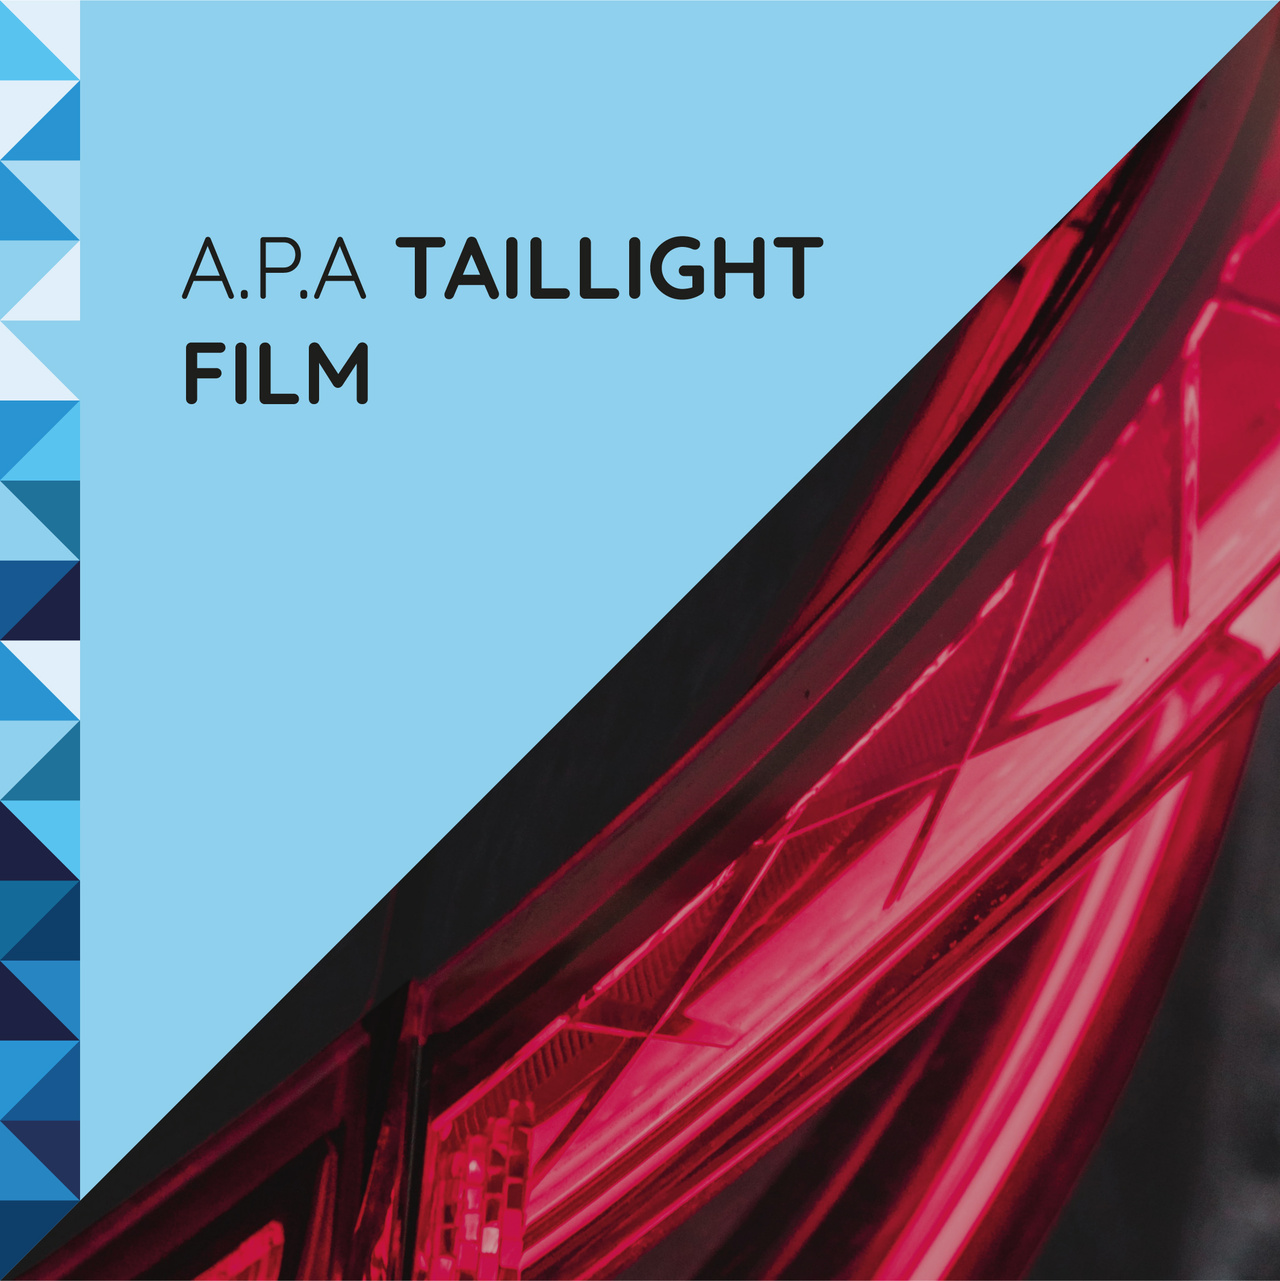 A.P.A Taillight Film